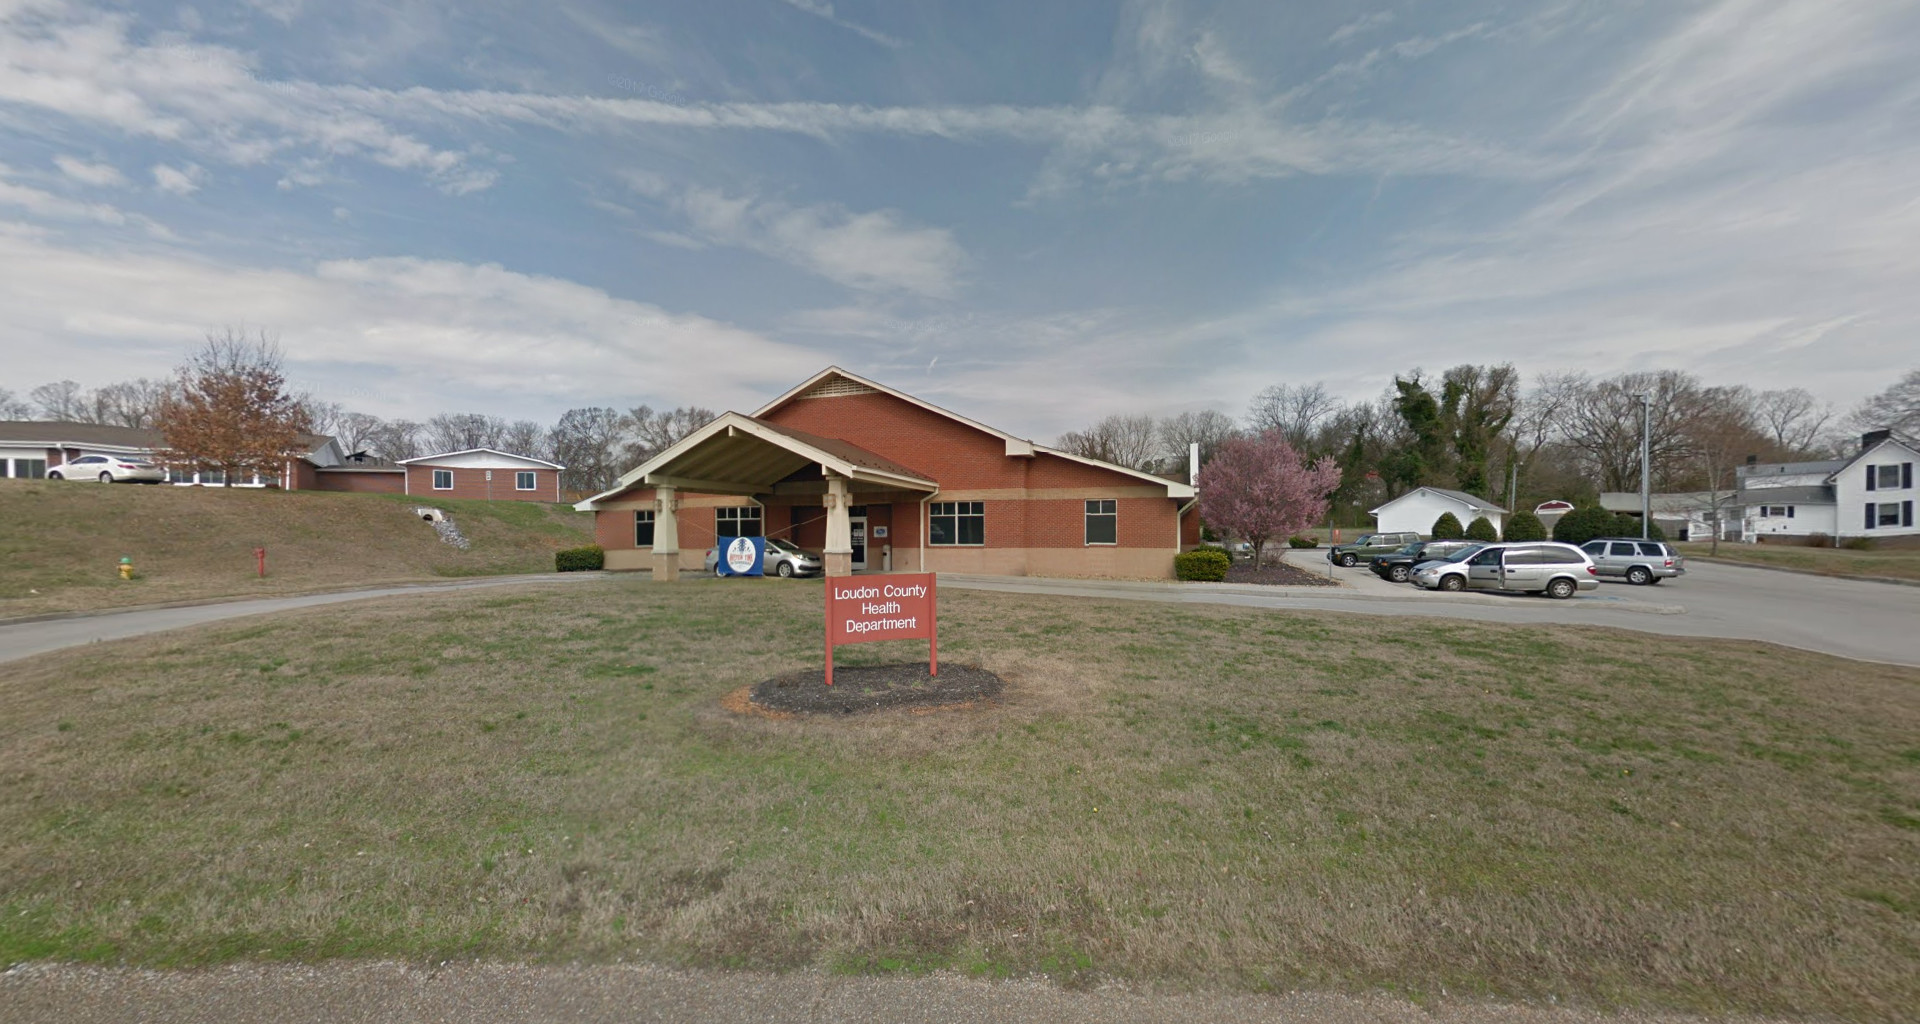 Loudon County Health Department Tennessee | Vital Office in Loudon